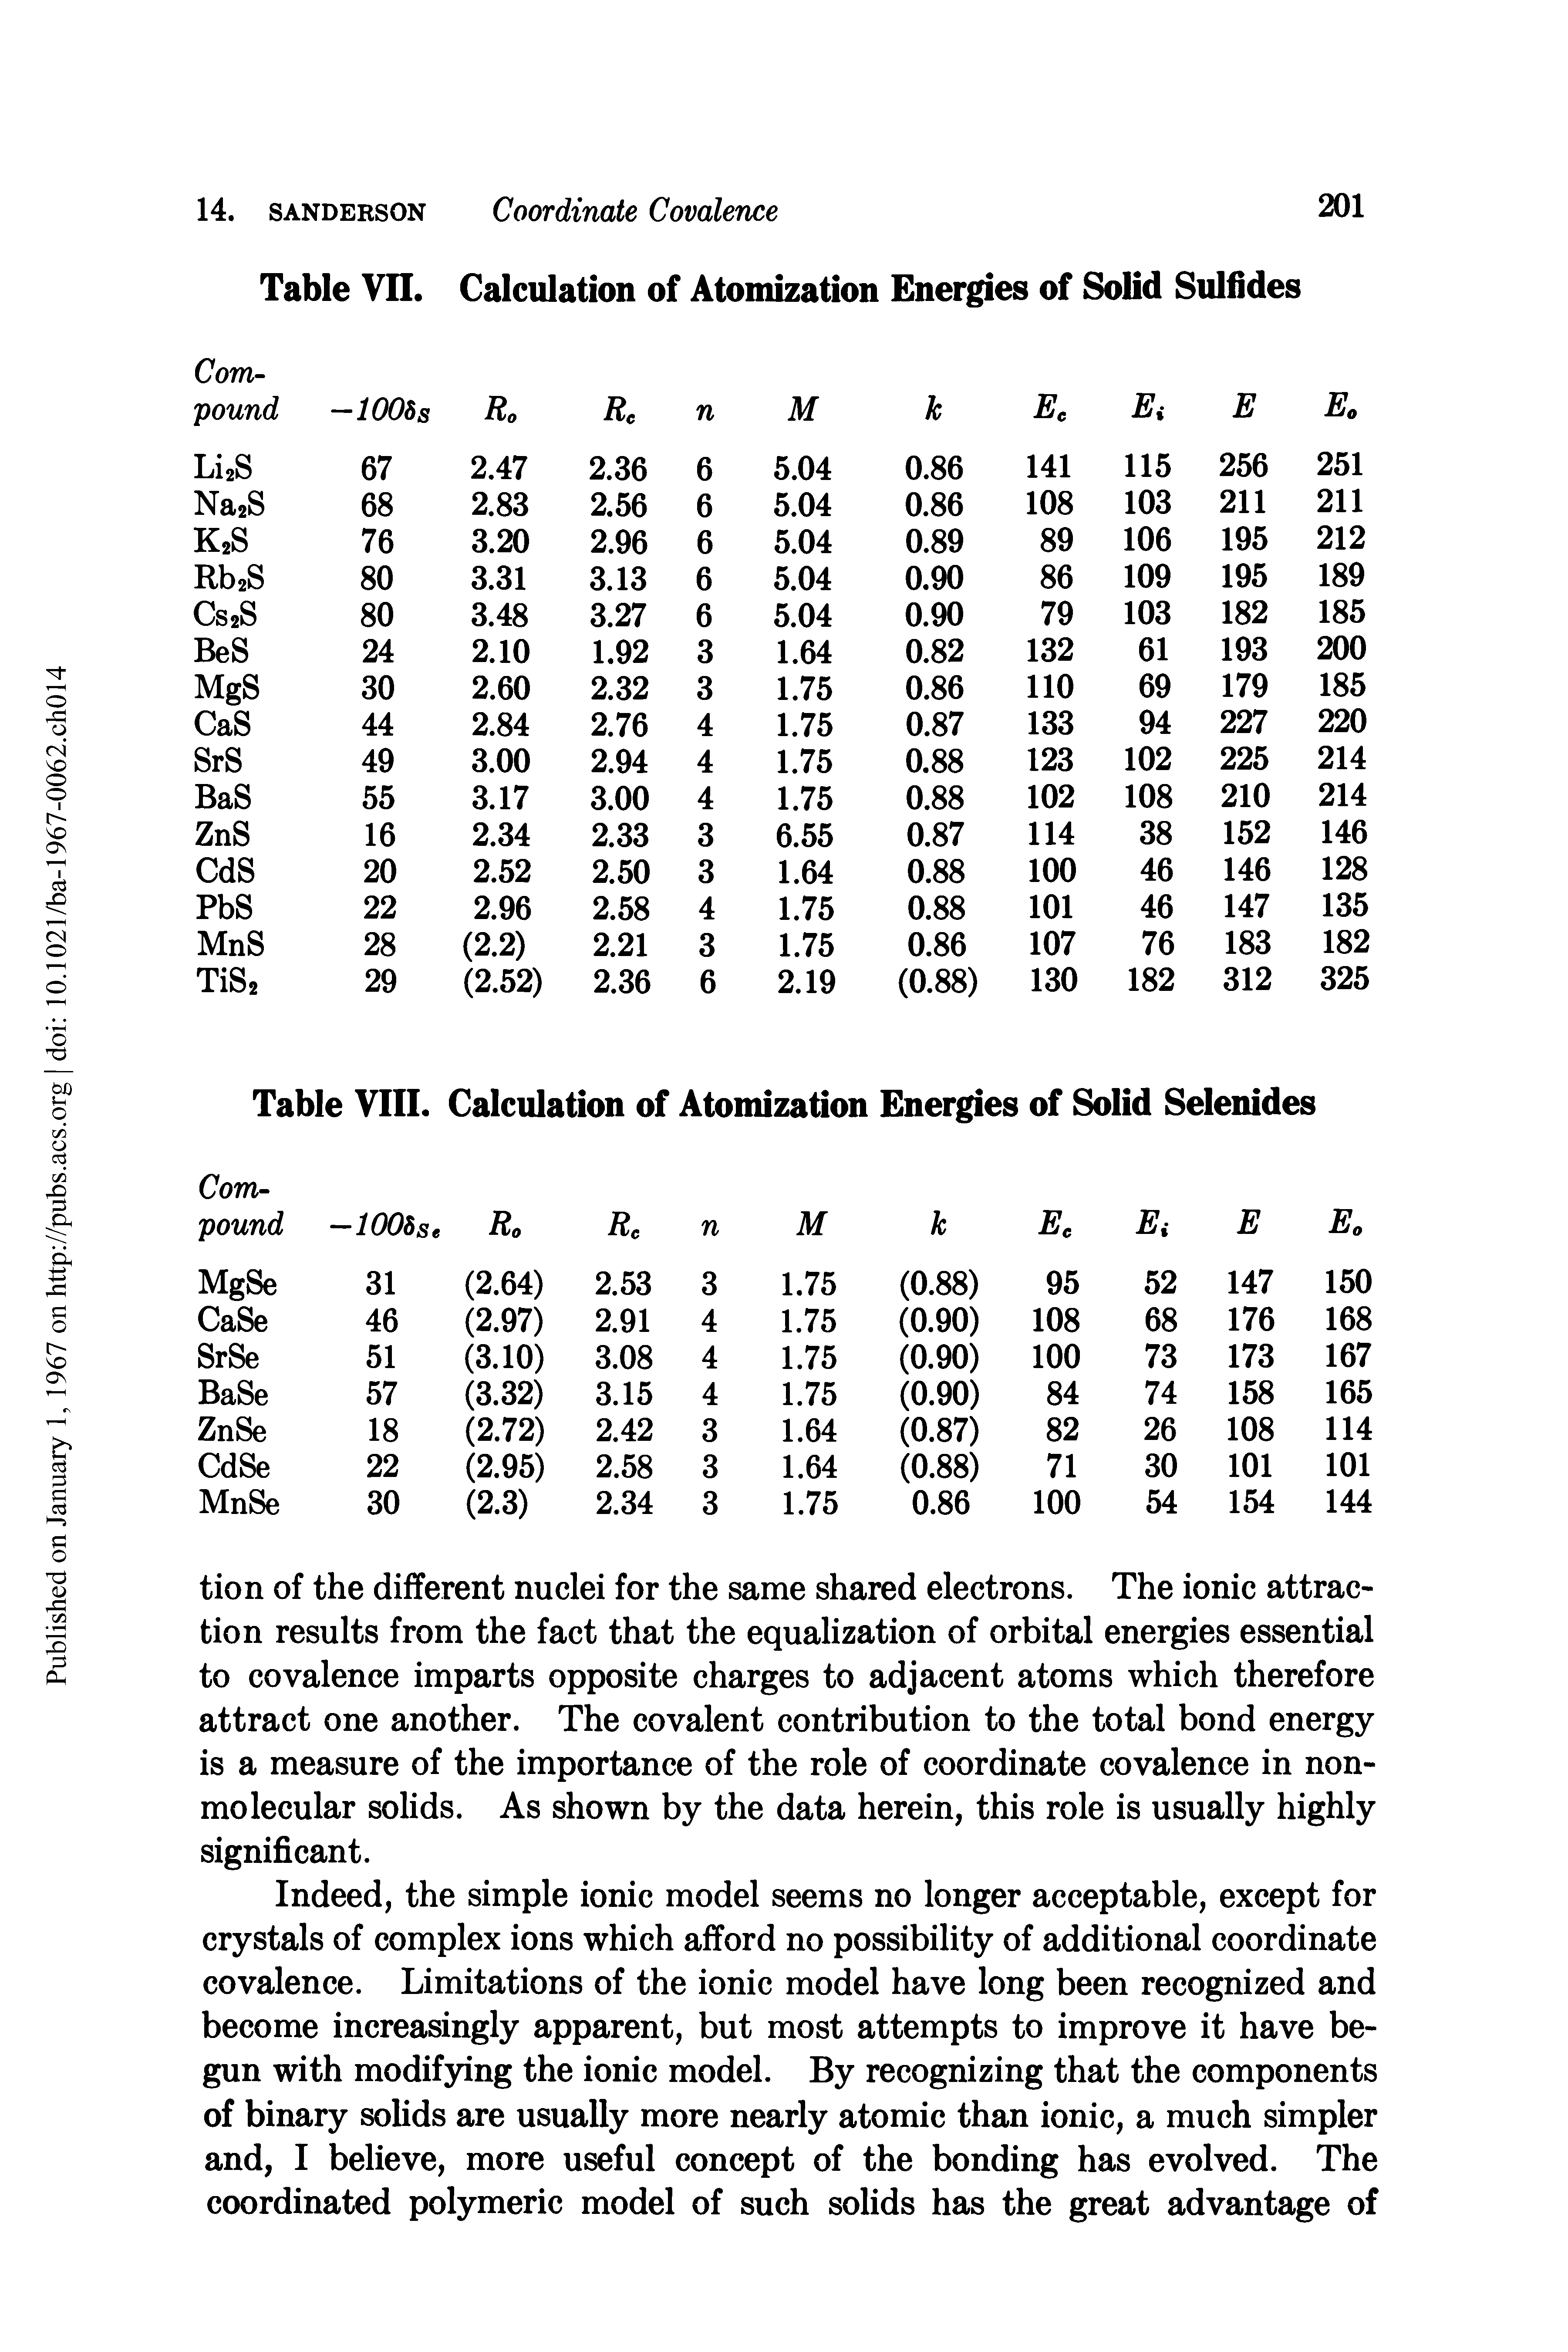 Table VIII. Calculation of Atomization Energies of Solid Selenides...